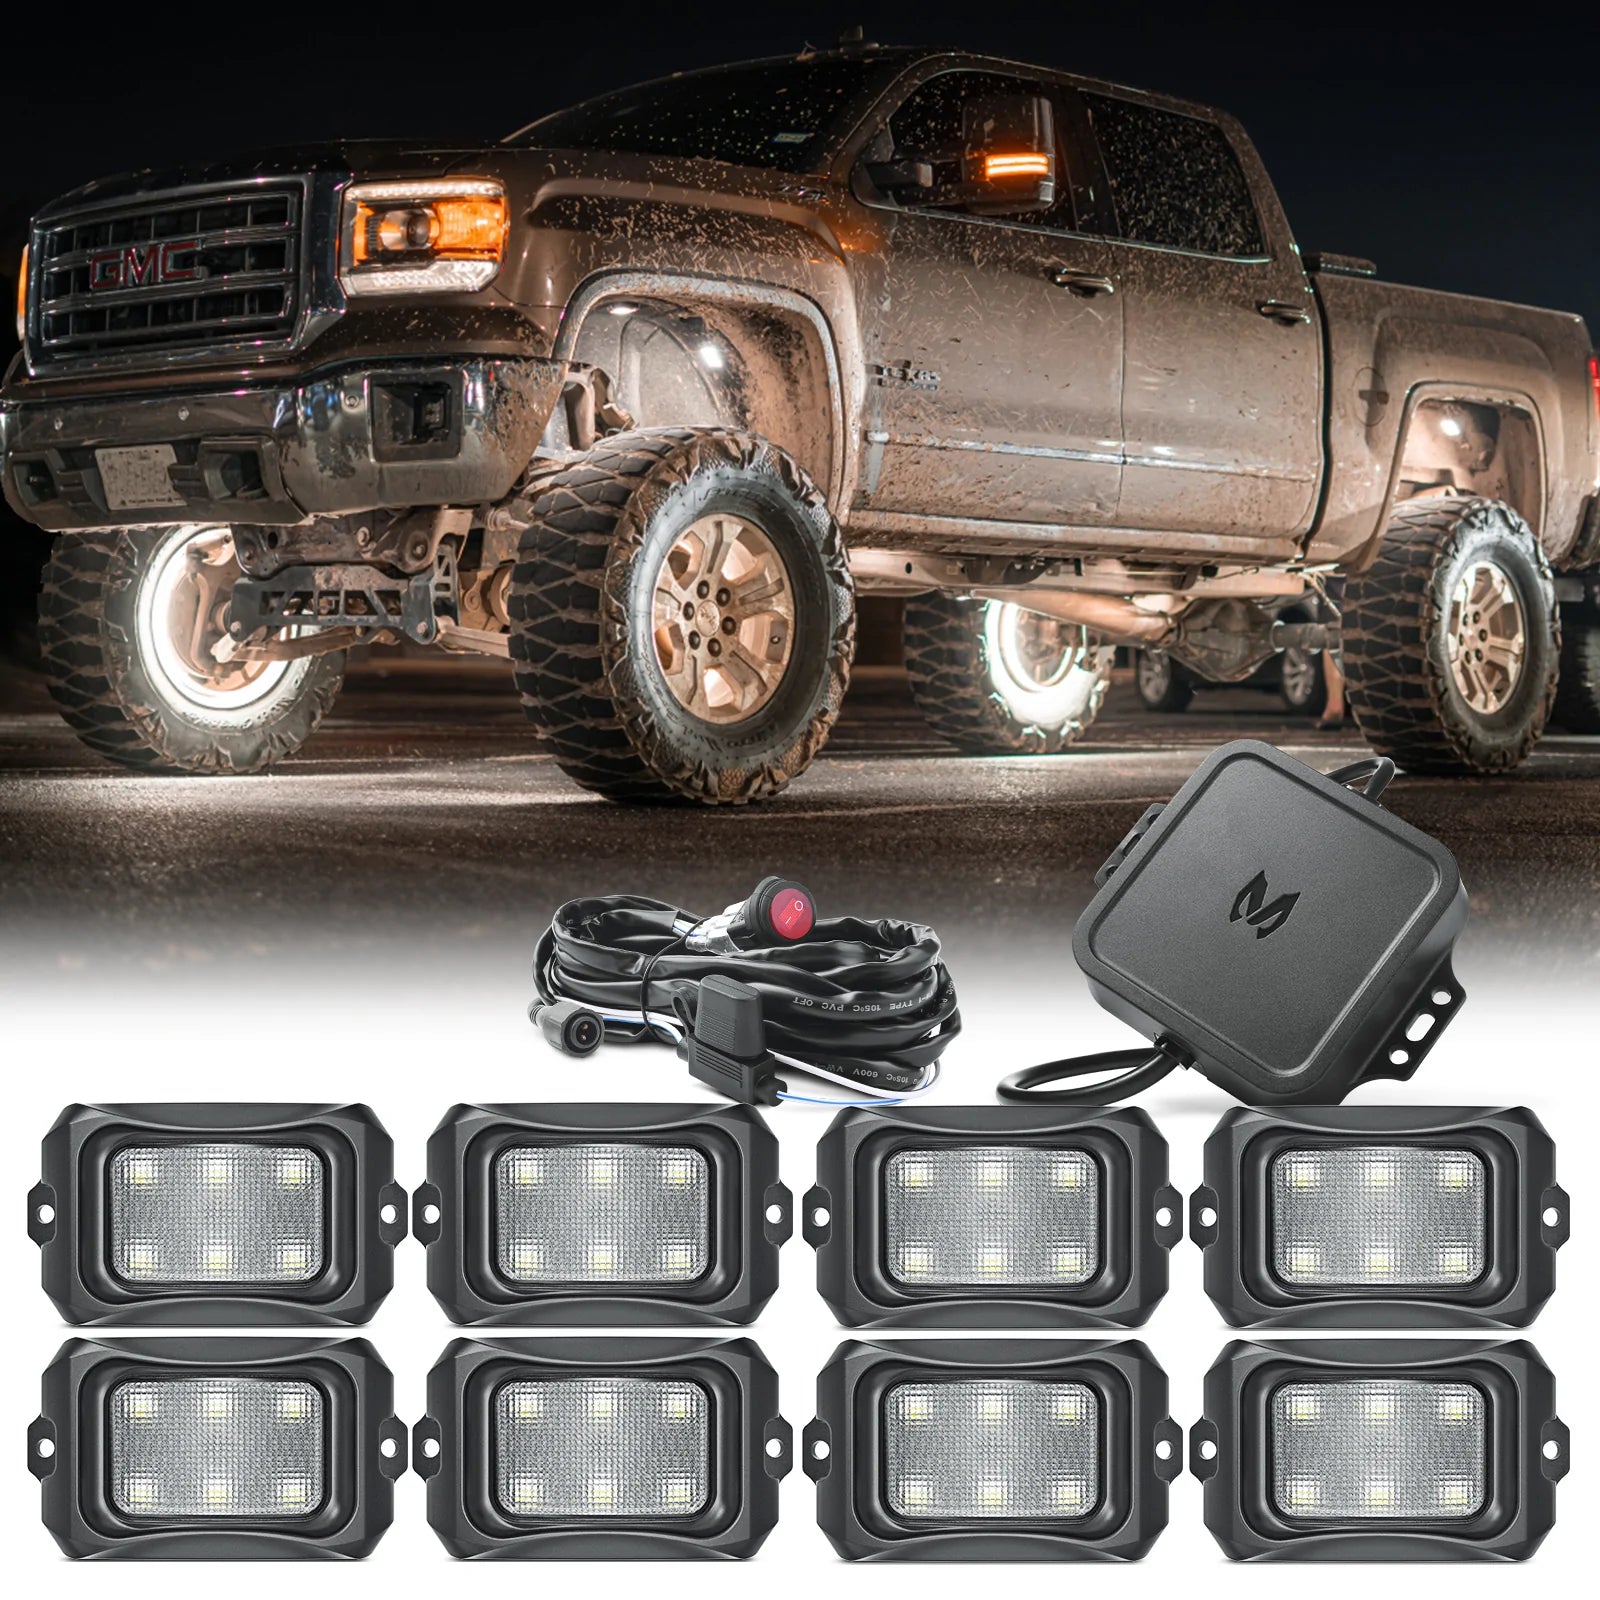 C2 8 Pods Curved RGBW Rock Lights Kit Plus with 15.5″/17.5″ RGBW LED Wheel Ring Lighting Kit with APP Control